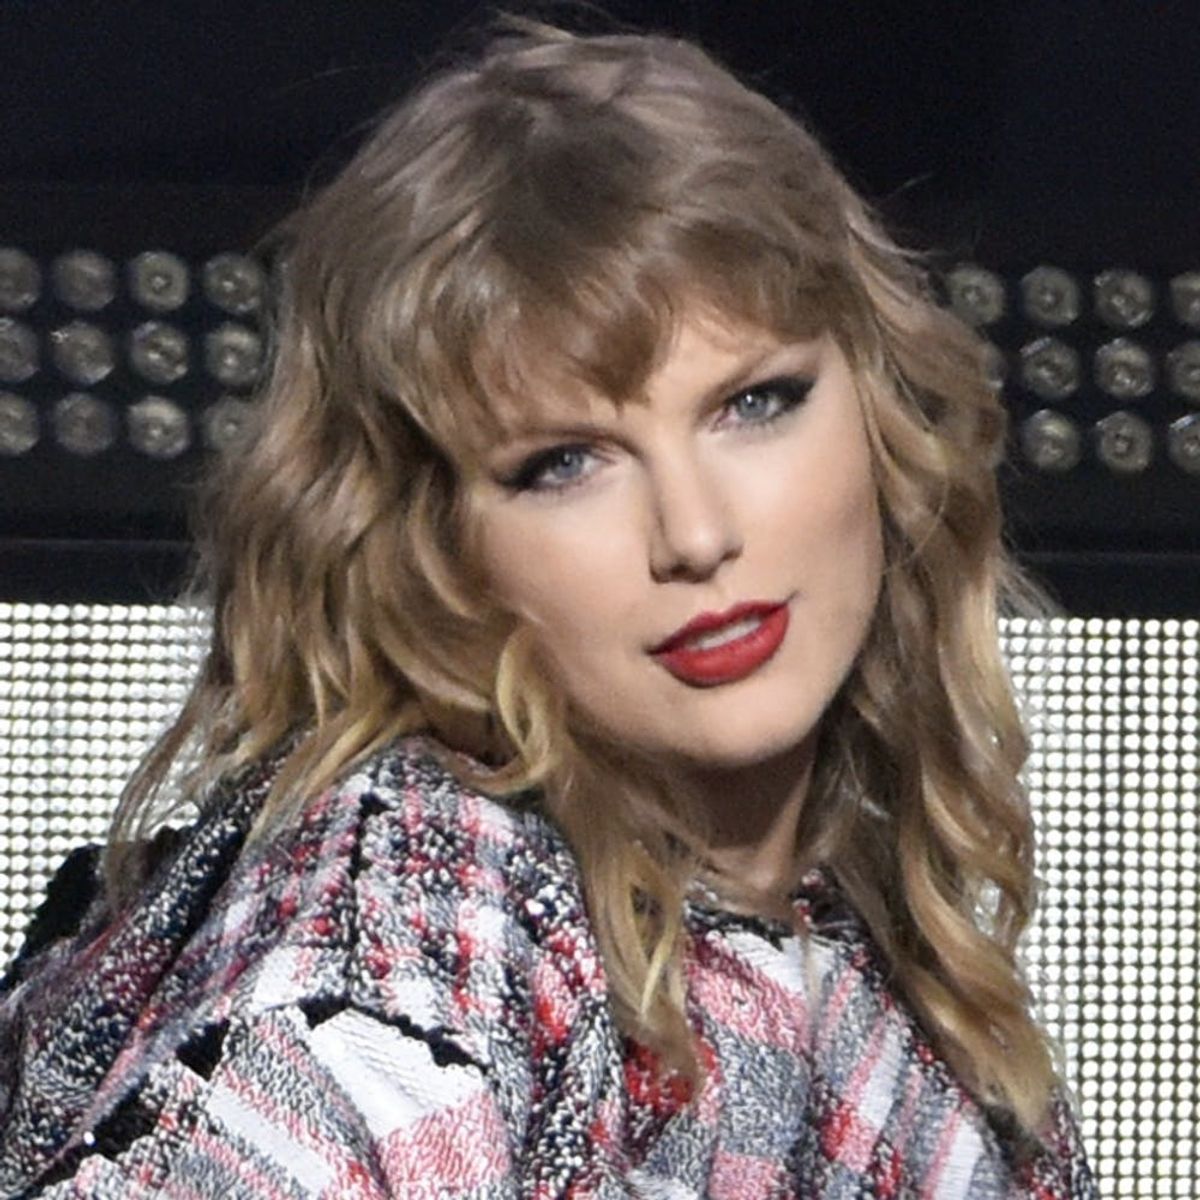 Twitter Has a Lot of Thoughts About Taylor Swift’s British “Vogue” Cover